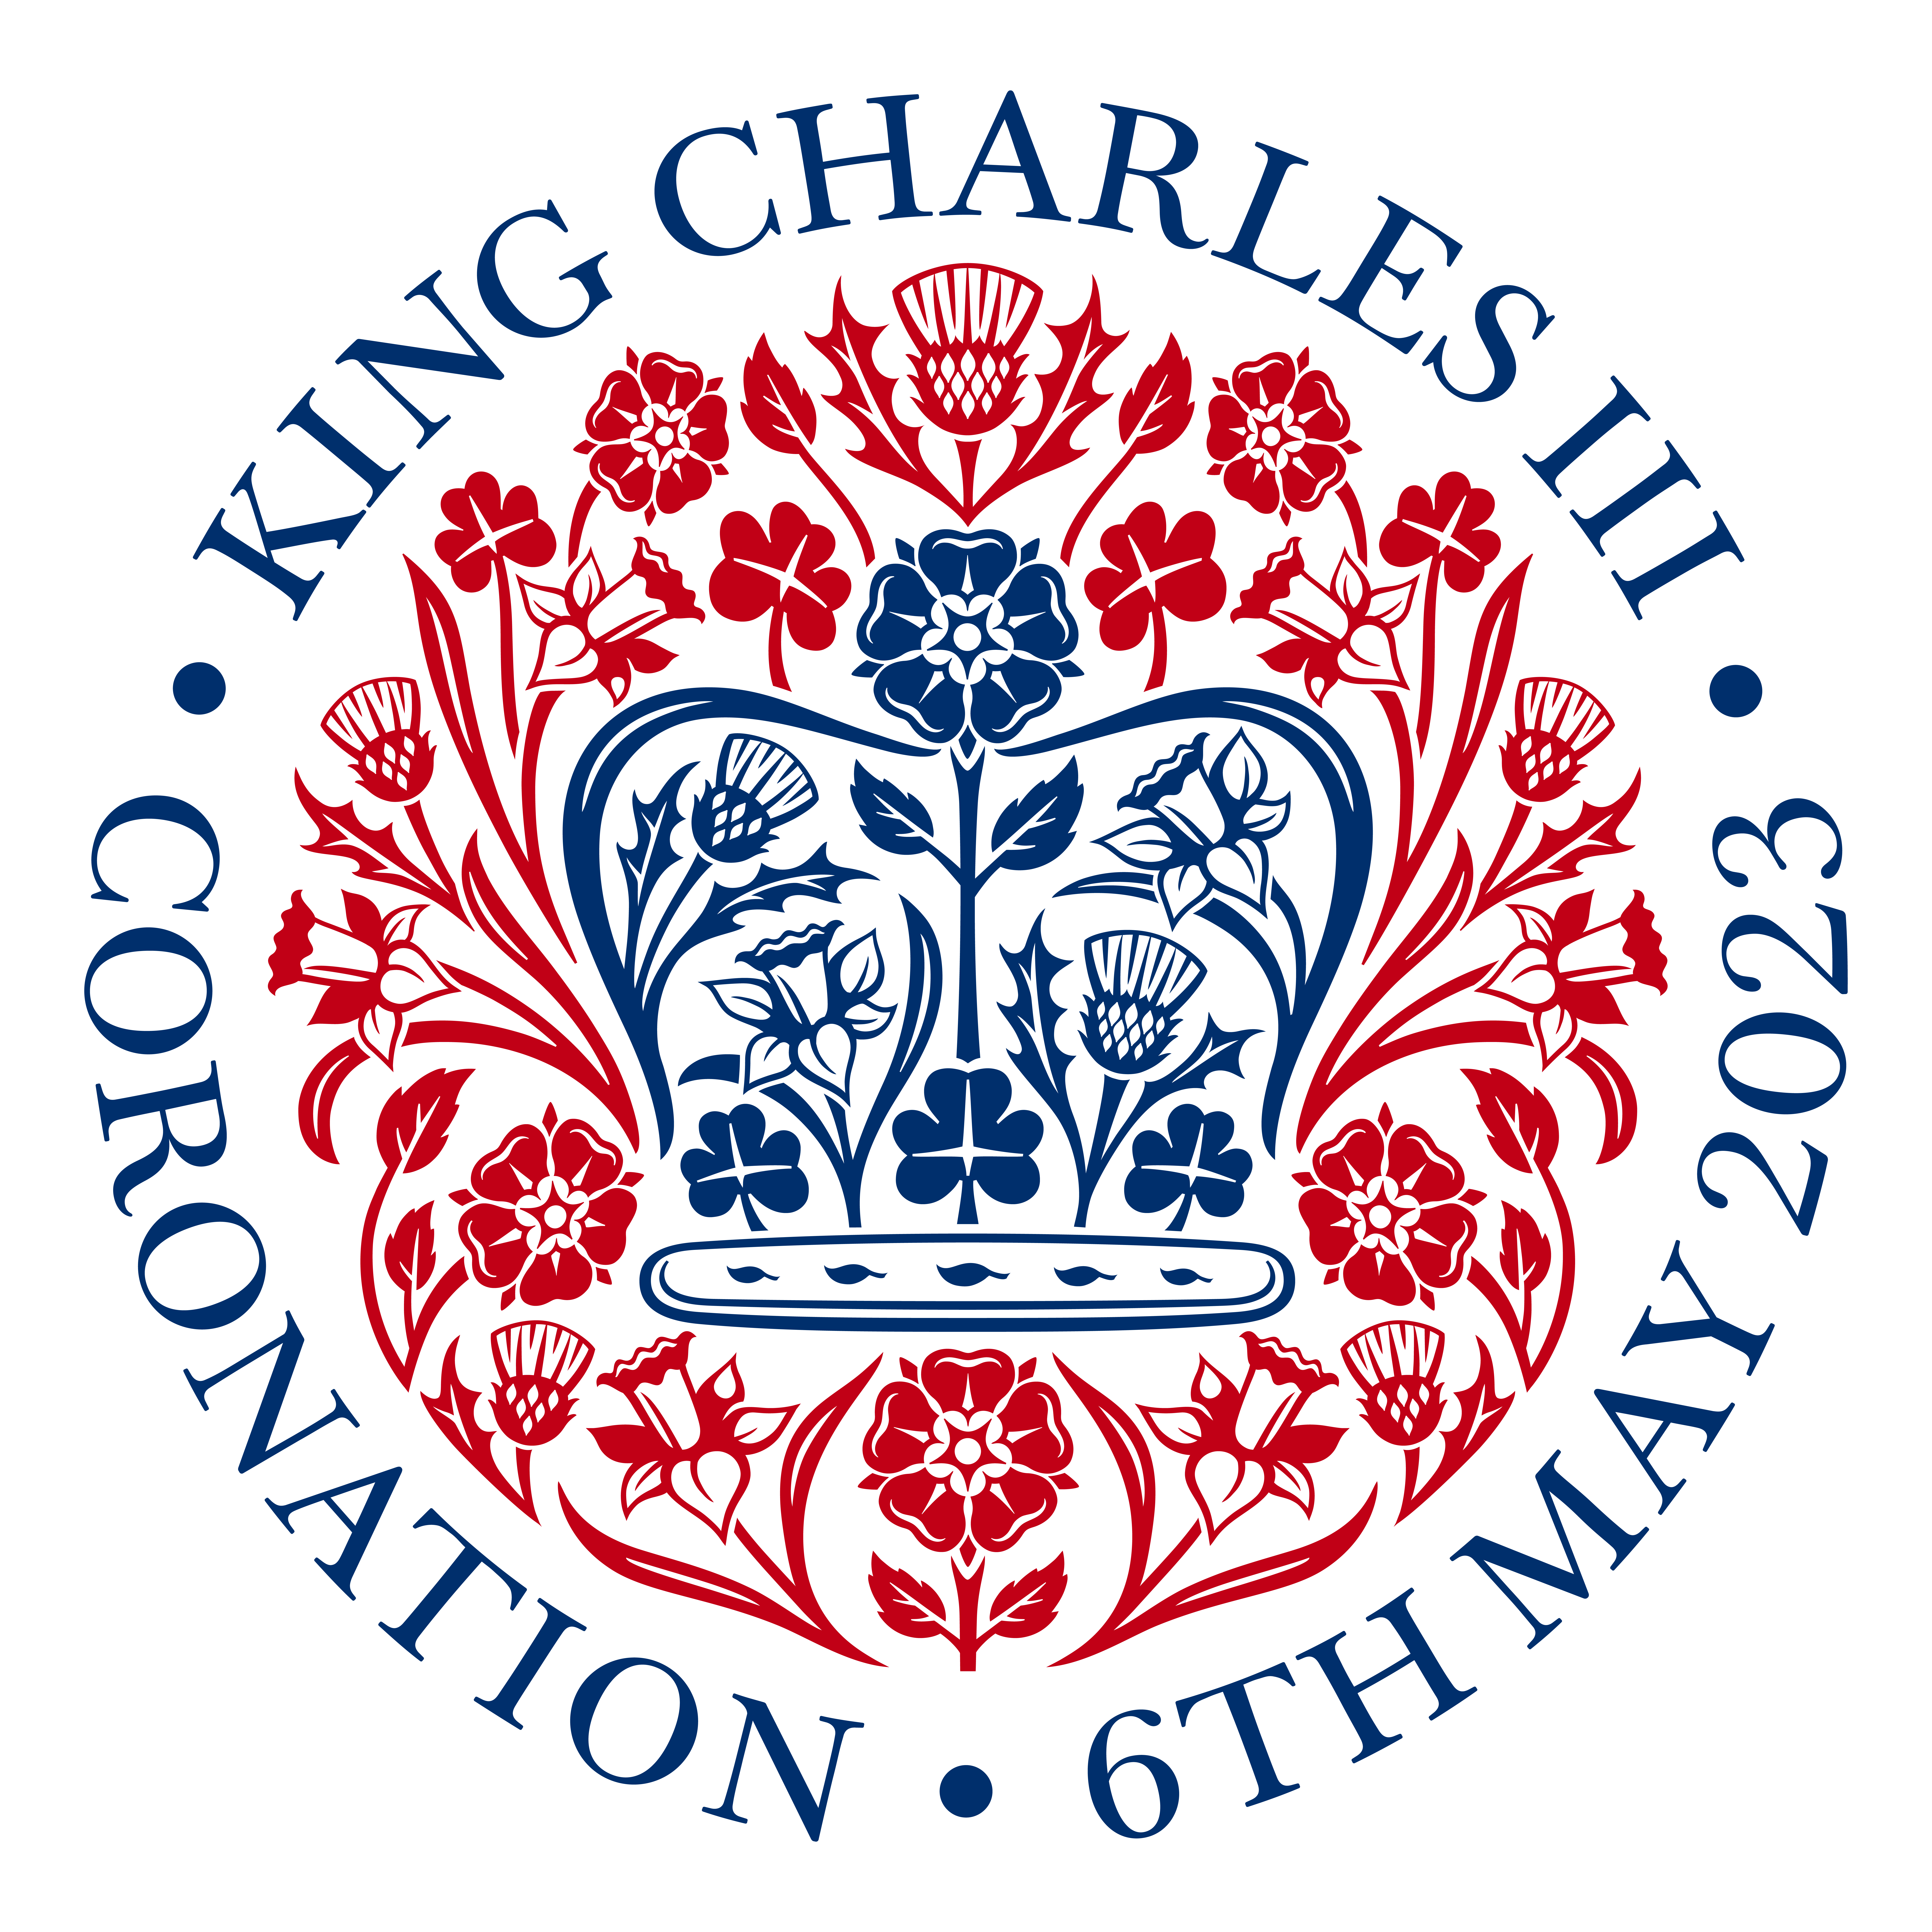 Grants to celebrate the coronation of His Majesty King Charles III